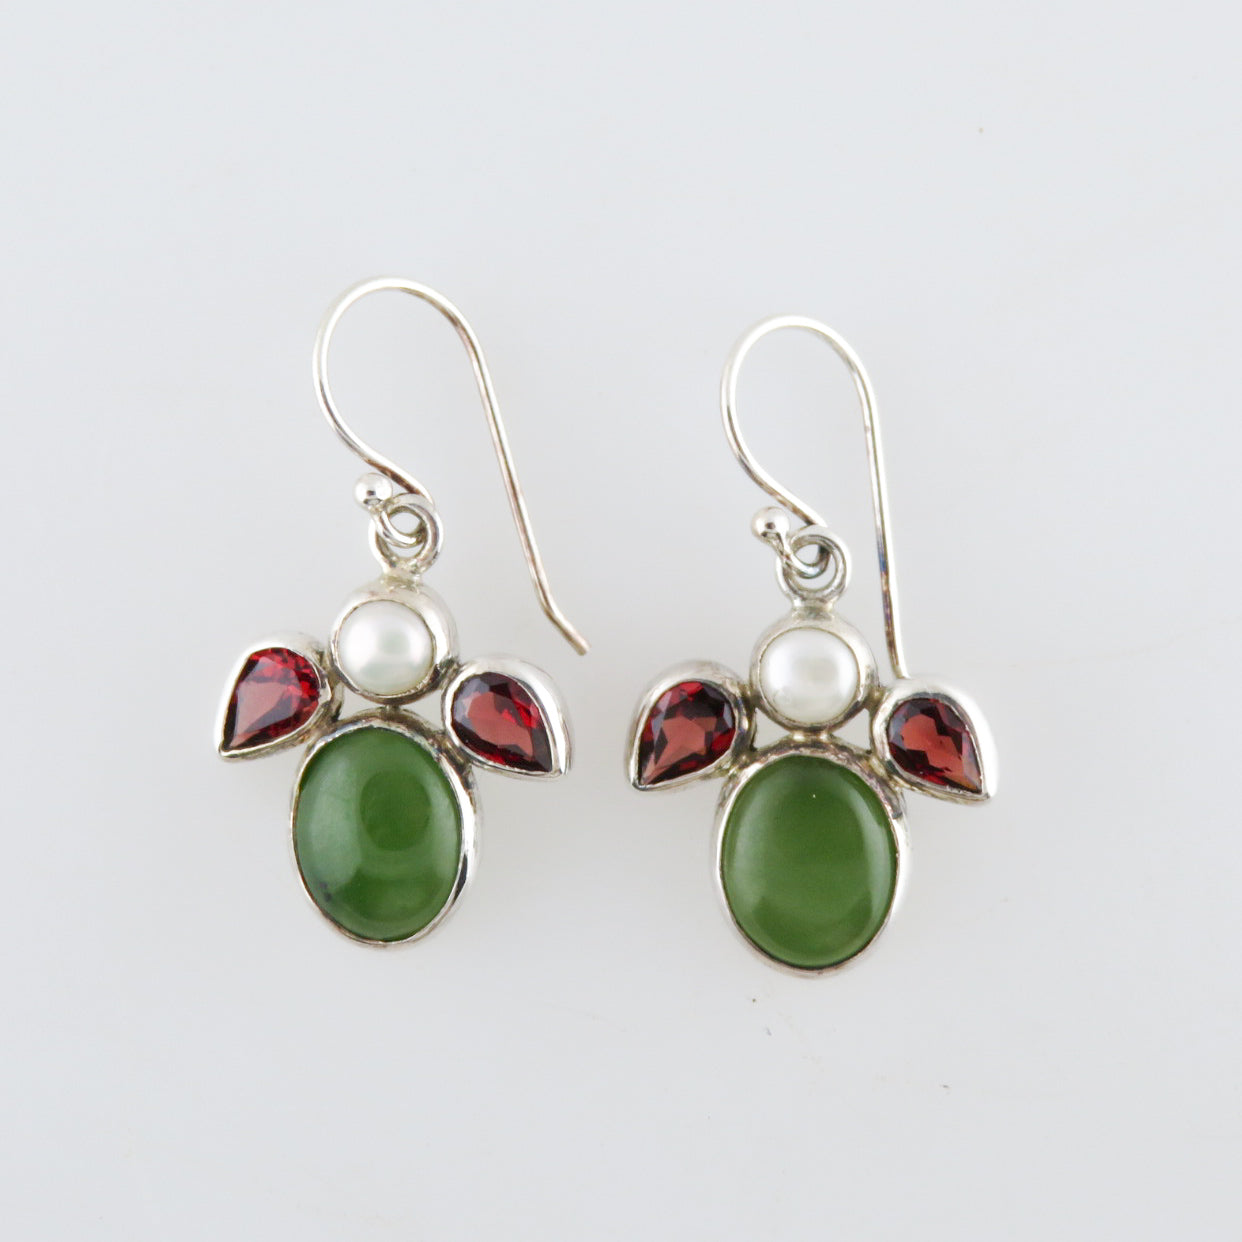 Nephrite Sterling Silver Earrings with Garnet and Fresh Water Pearls